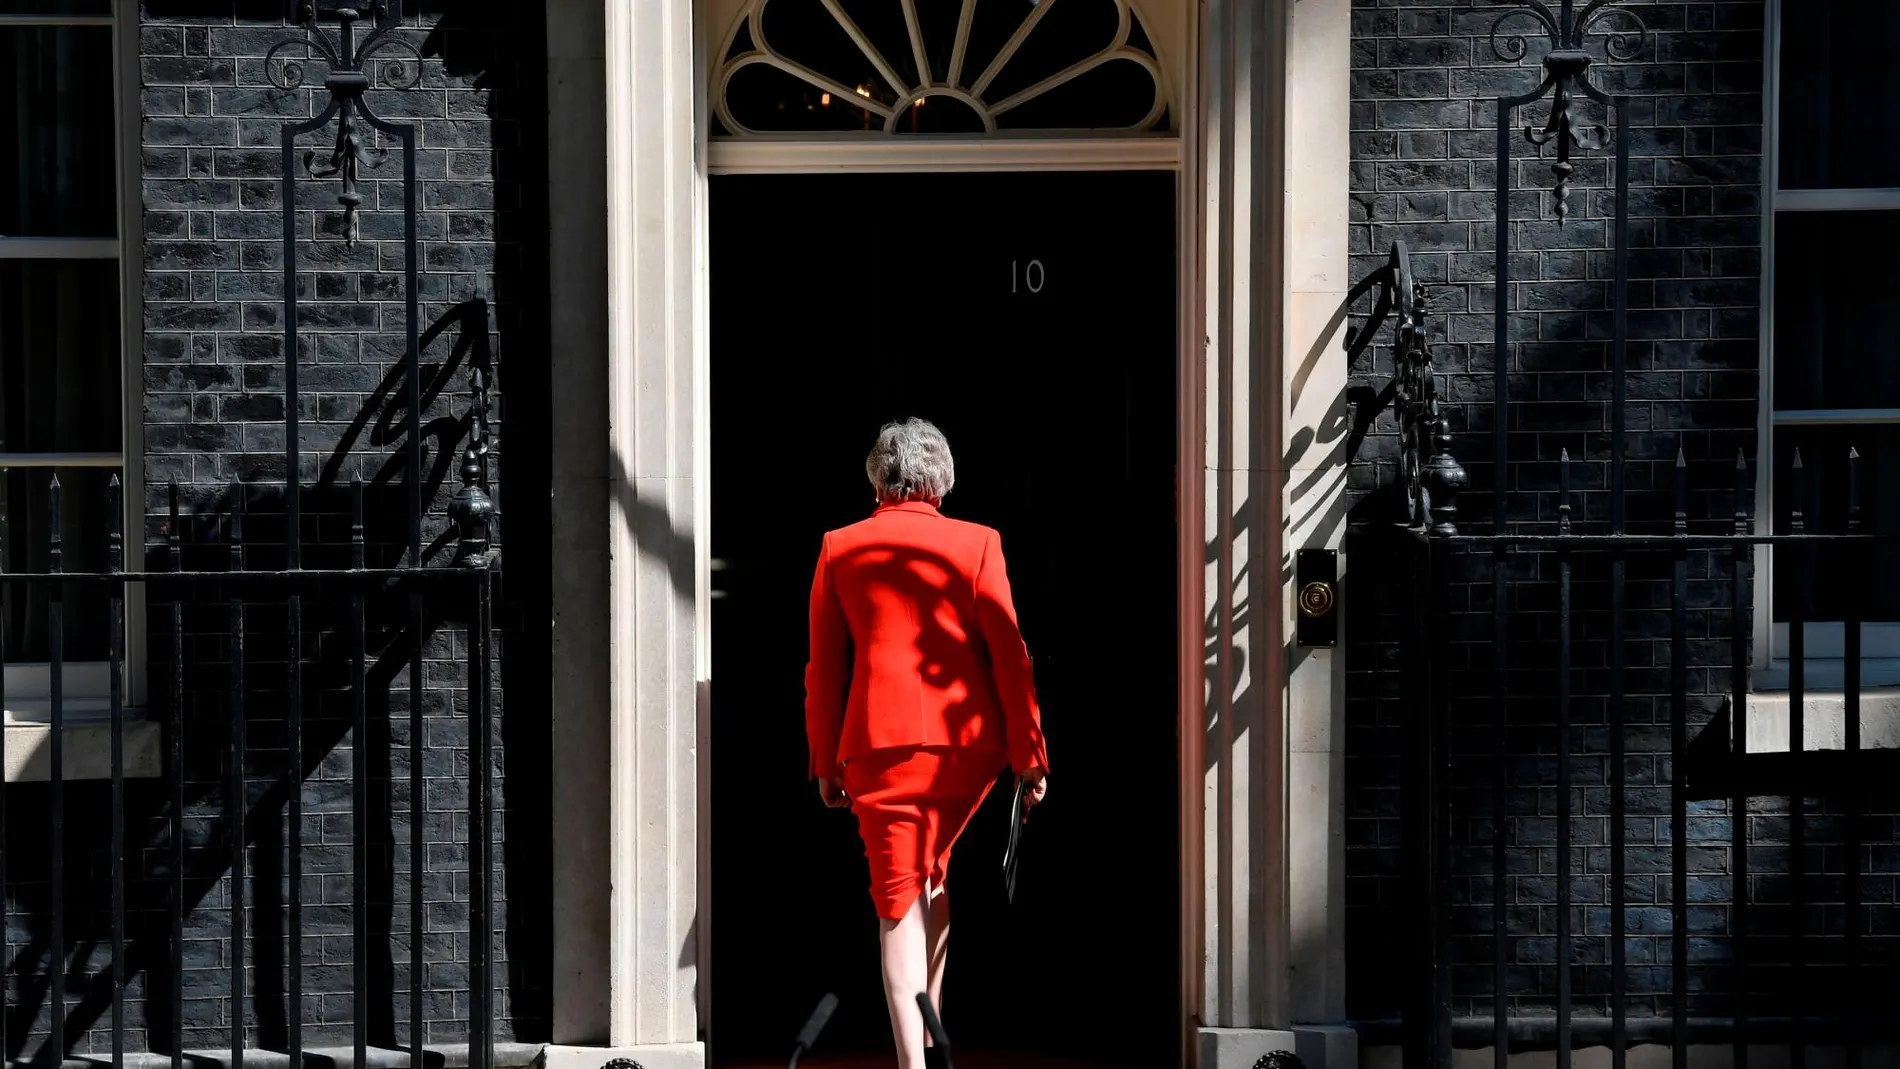 Theresa May vuelve al 10 de leaves after delivering a statement in London, Britain, May 24, 2019. Reuters/Toby Melville